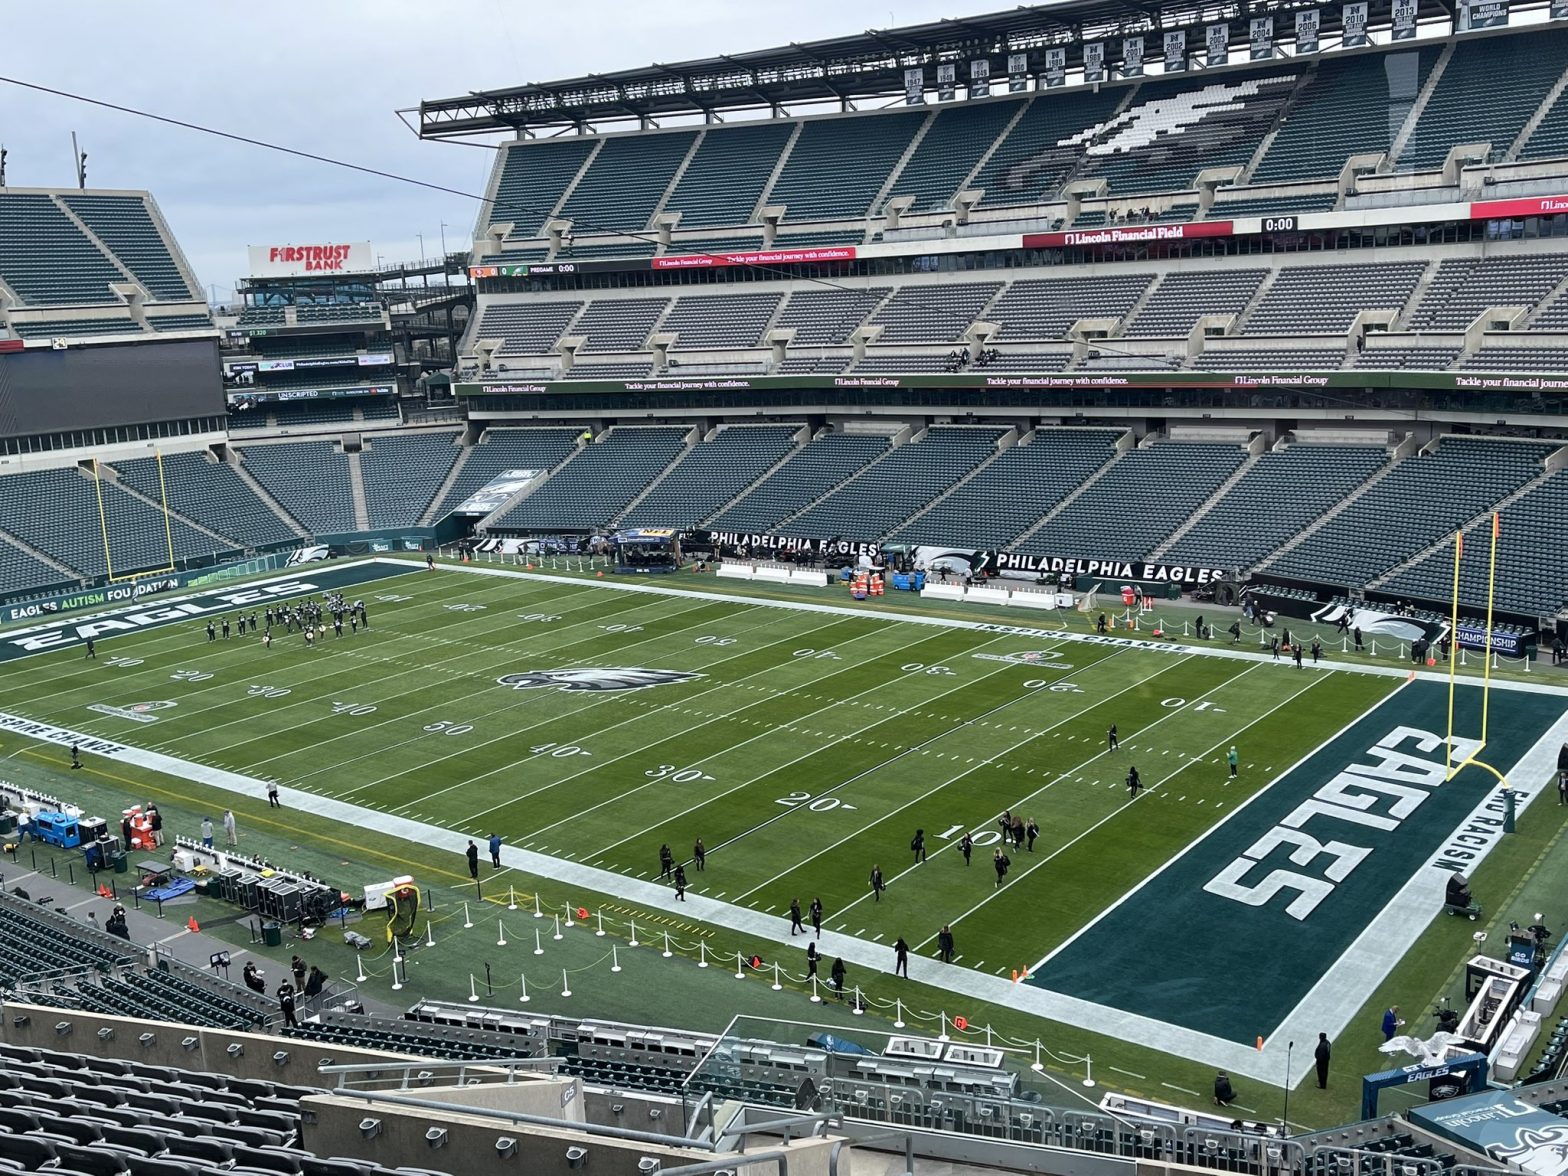 San Francisco 49ers vs Philadelphia Eagles: Will rain, wind affect NFL Conference Championship game at Lincoln Financial Field?